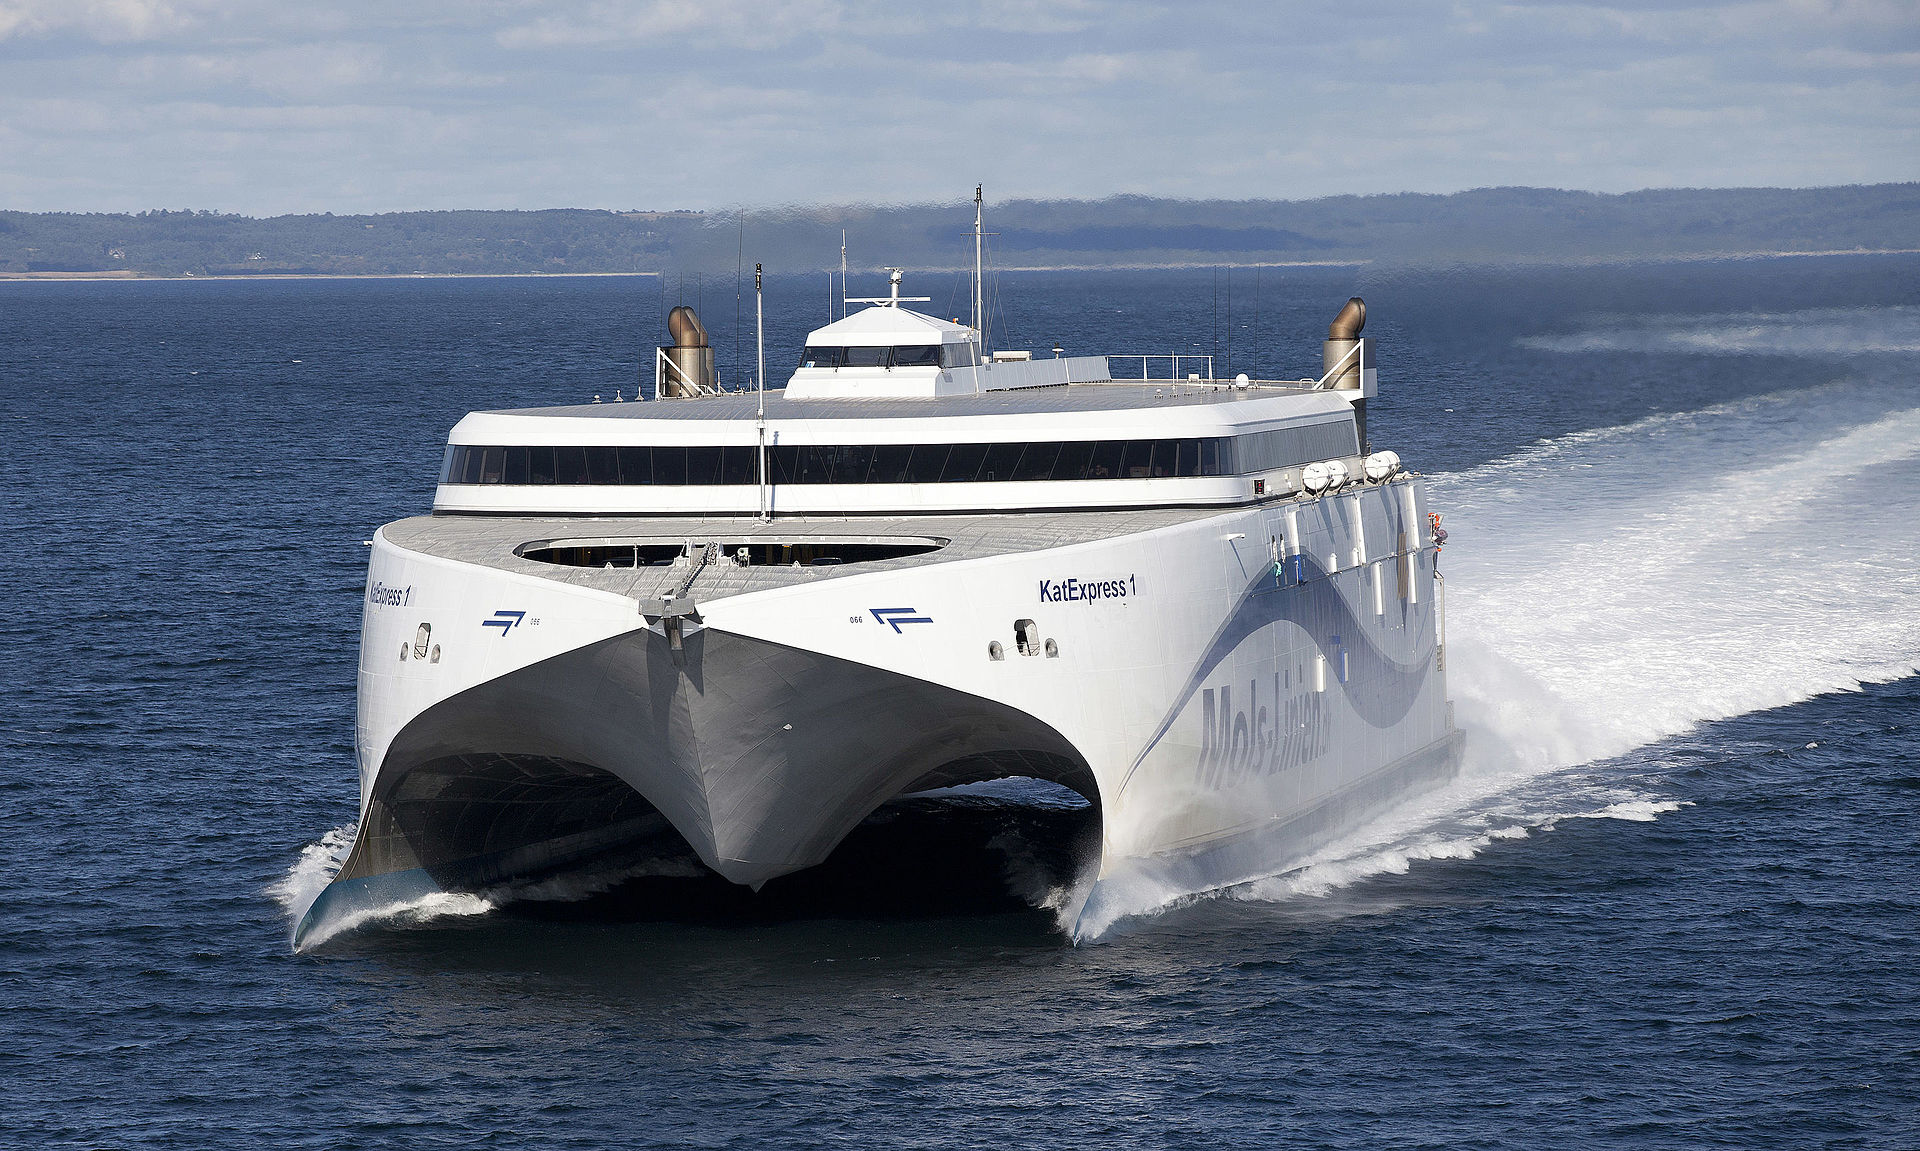 largest catamaran ferry in the world